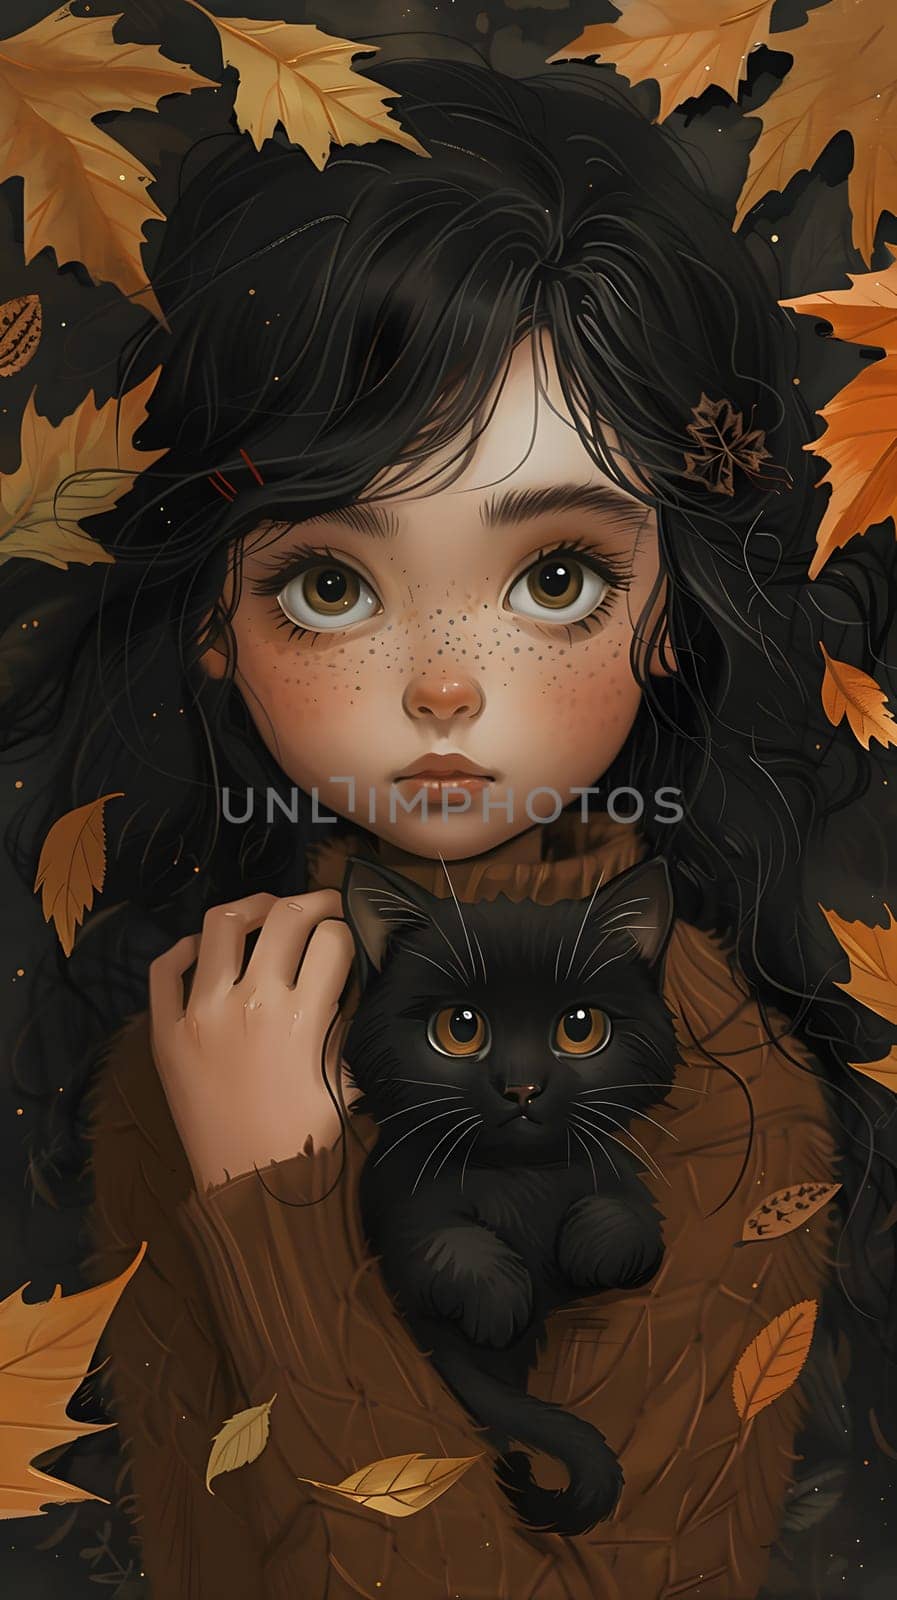 A girl holding a black cat with beautiful fur and mesmerizing eyes by Nadtochiy